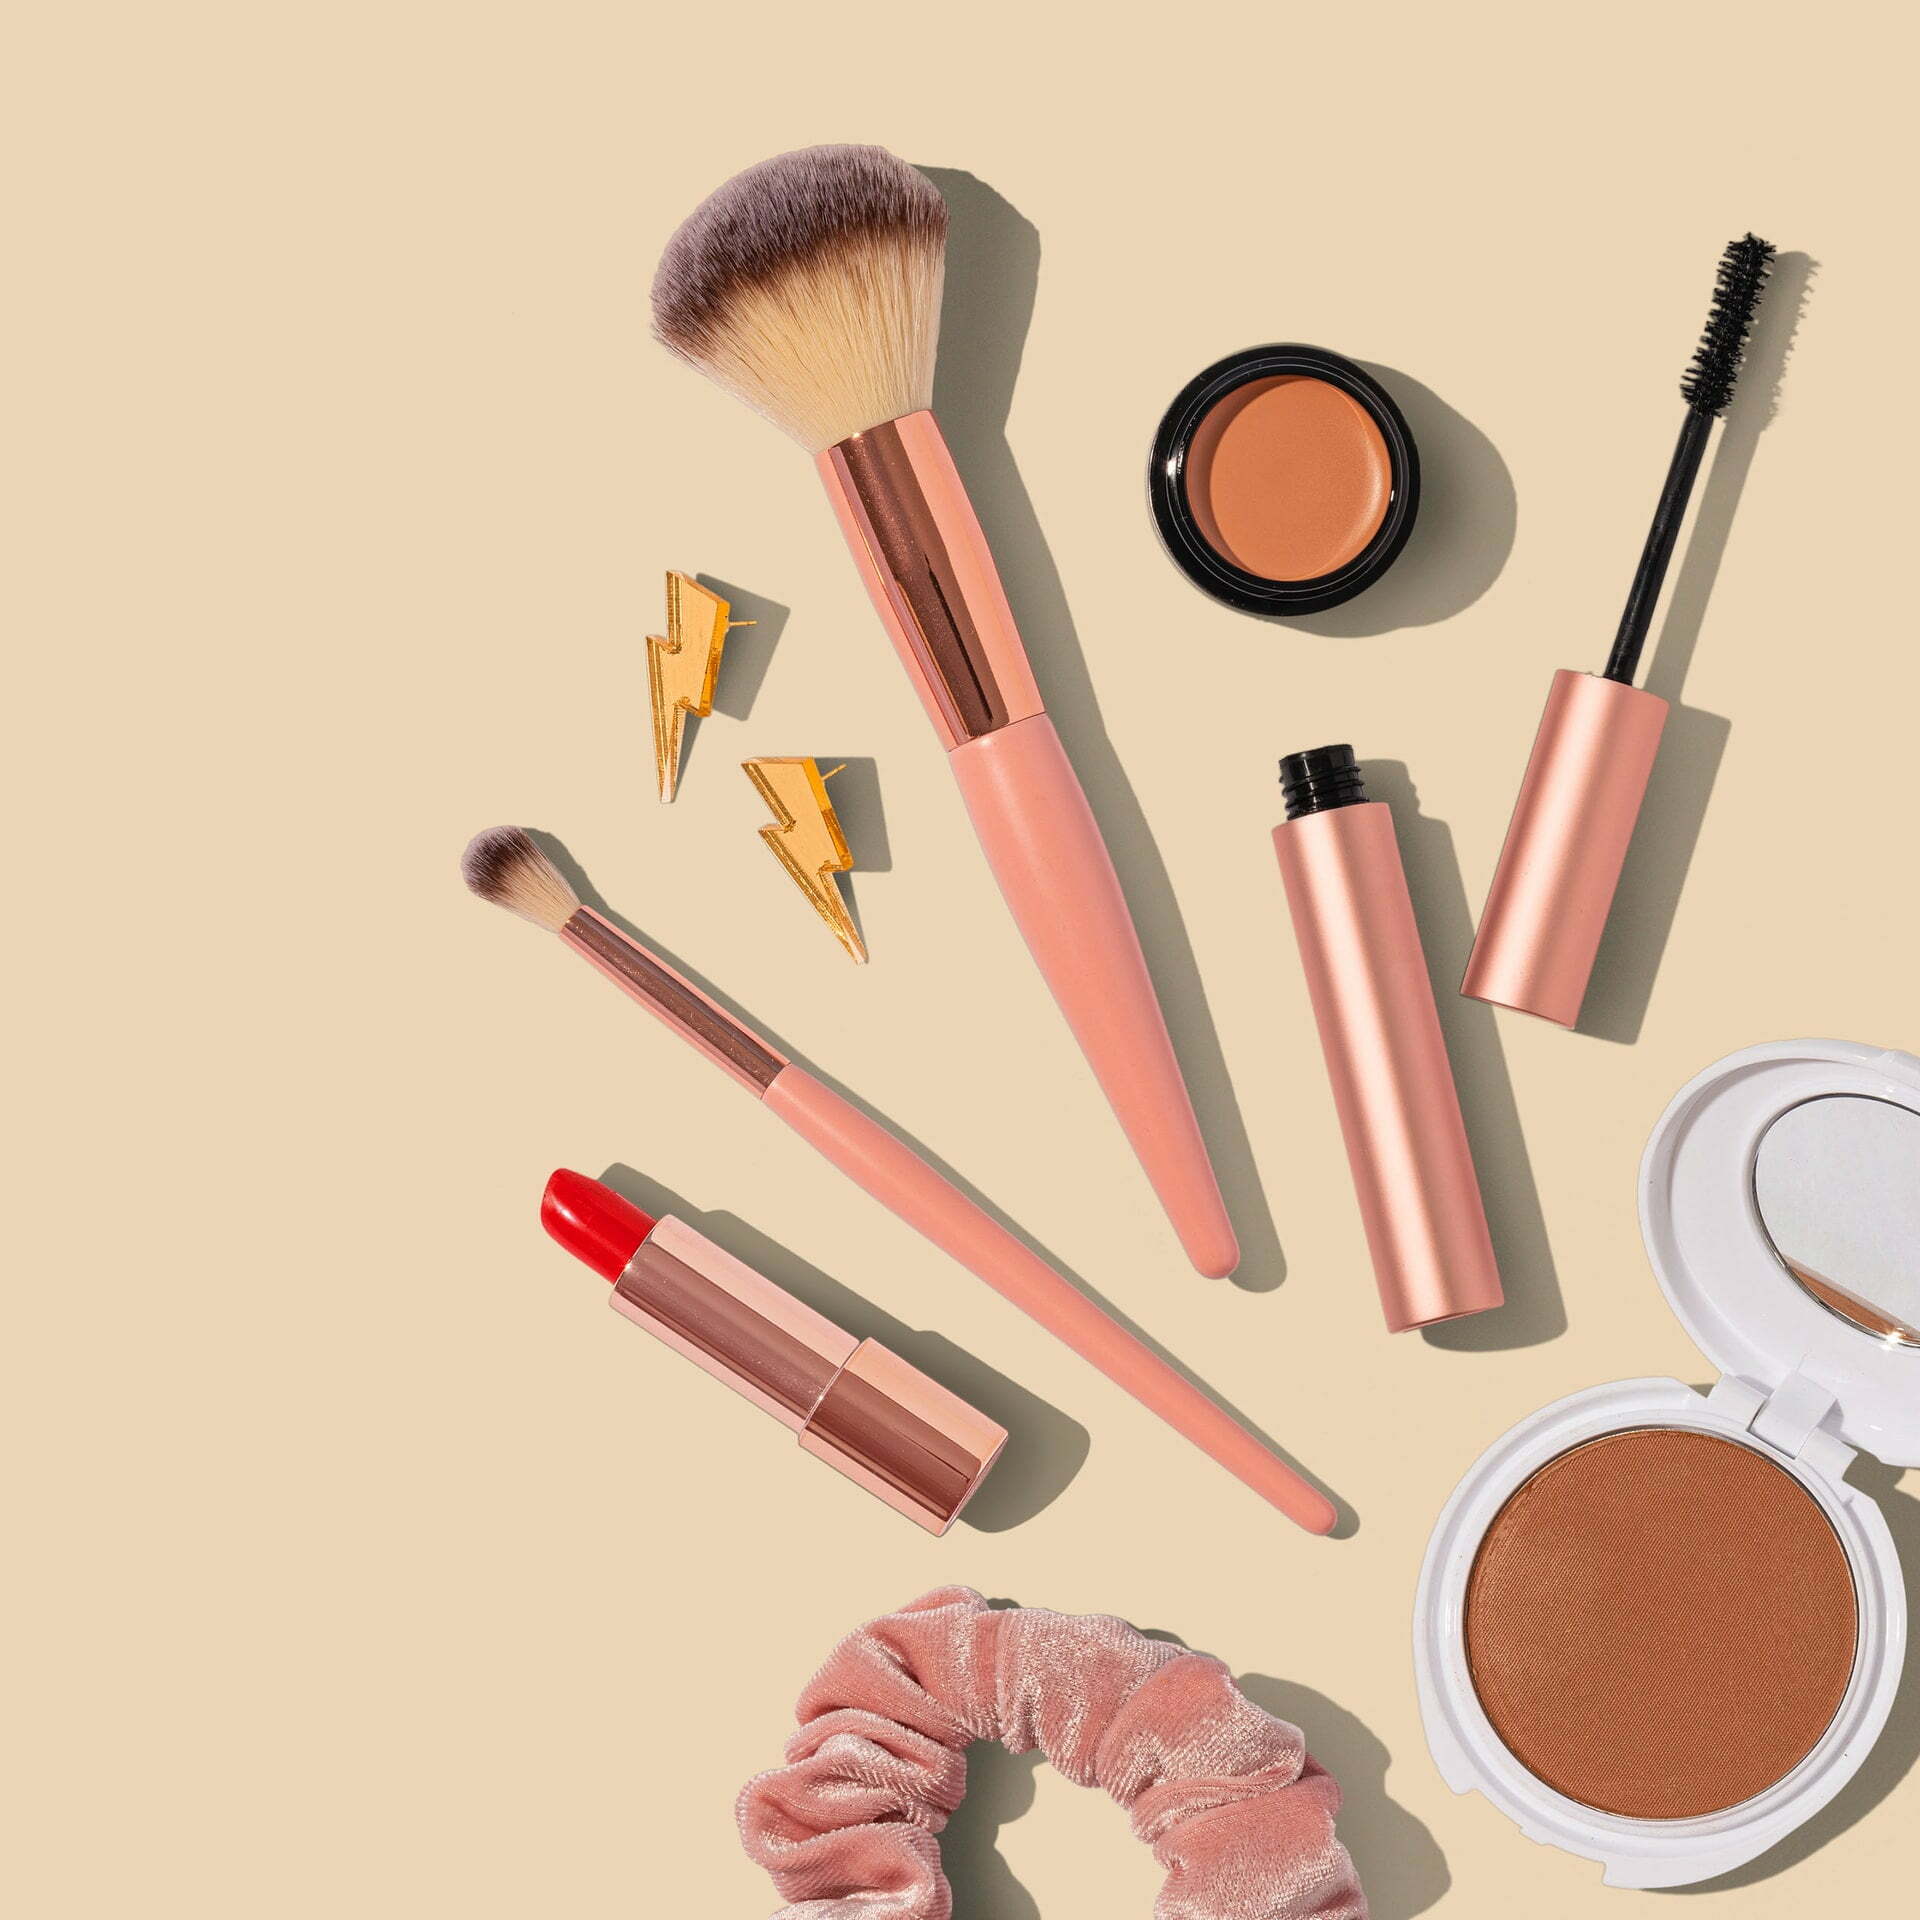 How Has the Coronavirus Impacted Packaging in the Beauty Industry?